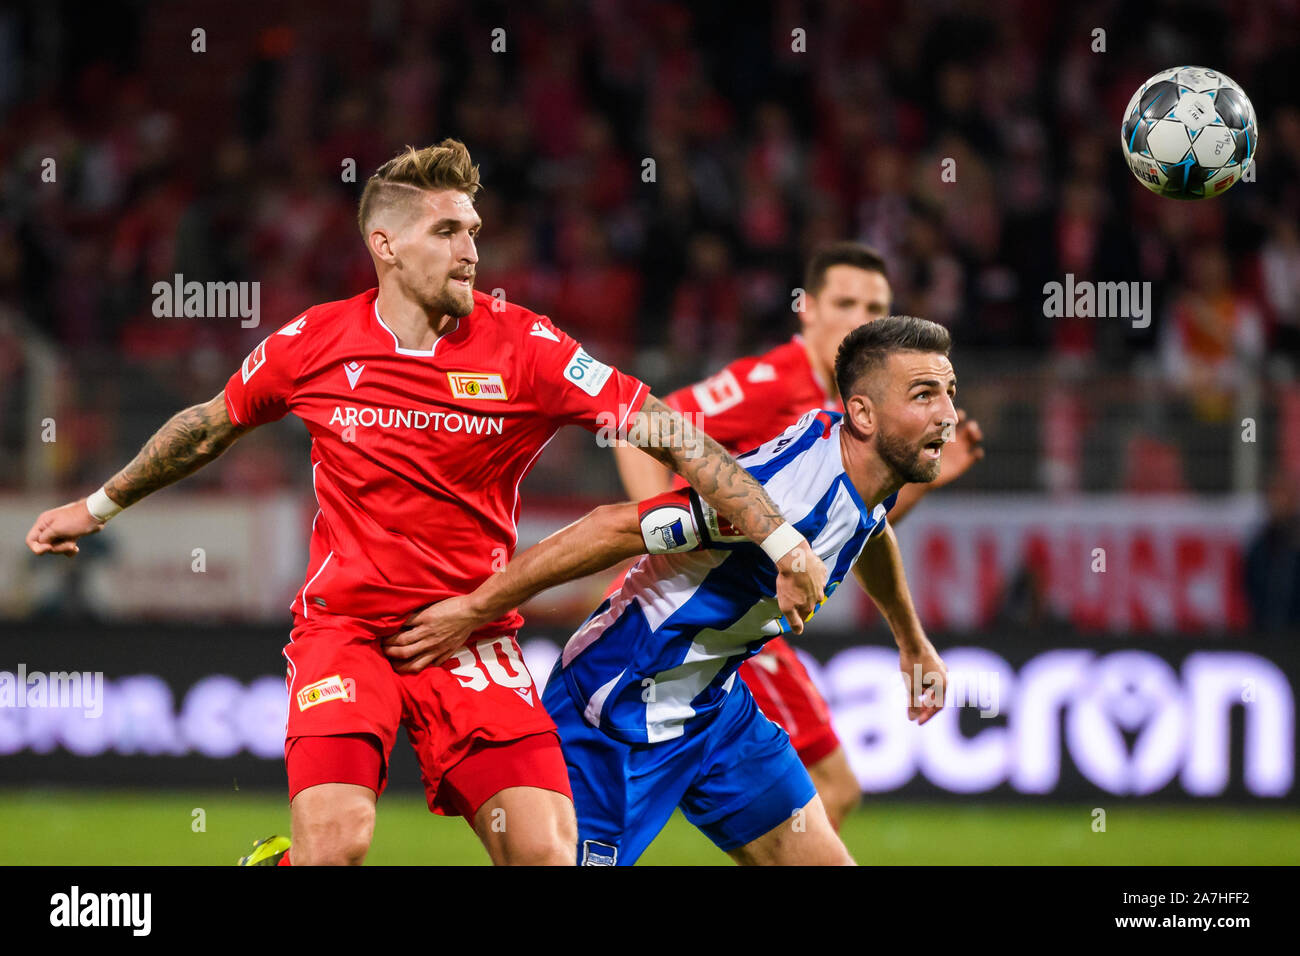 Berlin, Germany. 2nd Nov, 2019. Robert Andrich (L) of Union Berlin vies with Vedad Ibisevic of Hertha during their German Bundesliga match in Berlin, capital of Germany, on Nov. 2, 2019. Credit: Kevin Voigt/Xinhua/Alamy Live News Stock Photo